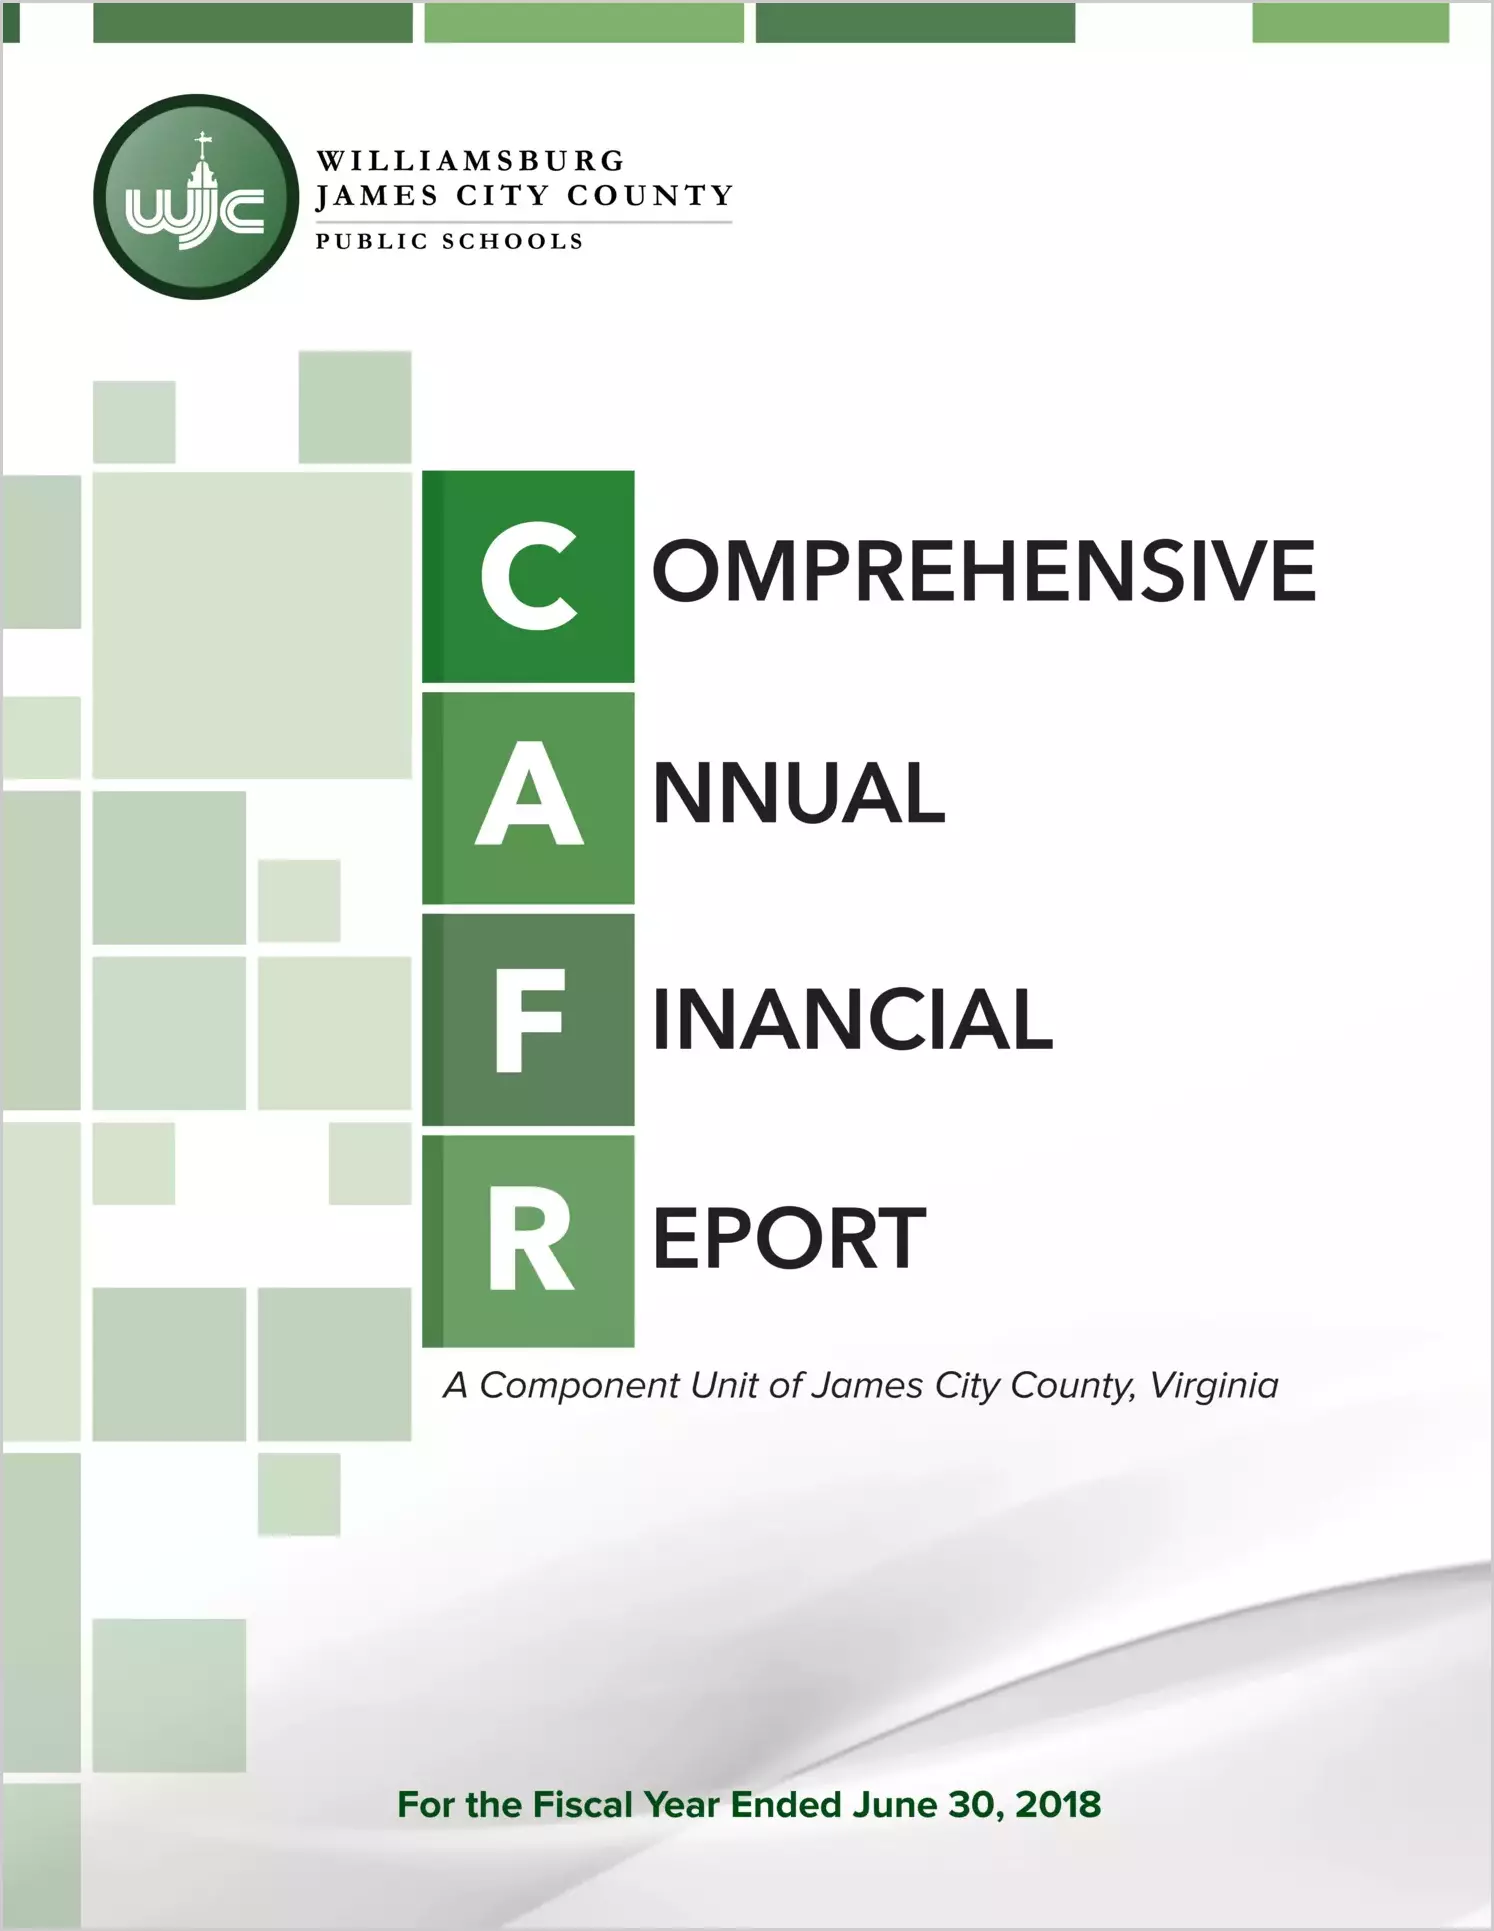 2018 Public Schools Annual Financial Report for County of James City